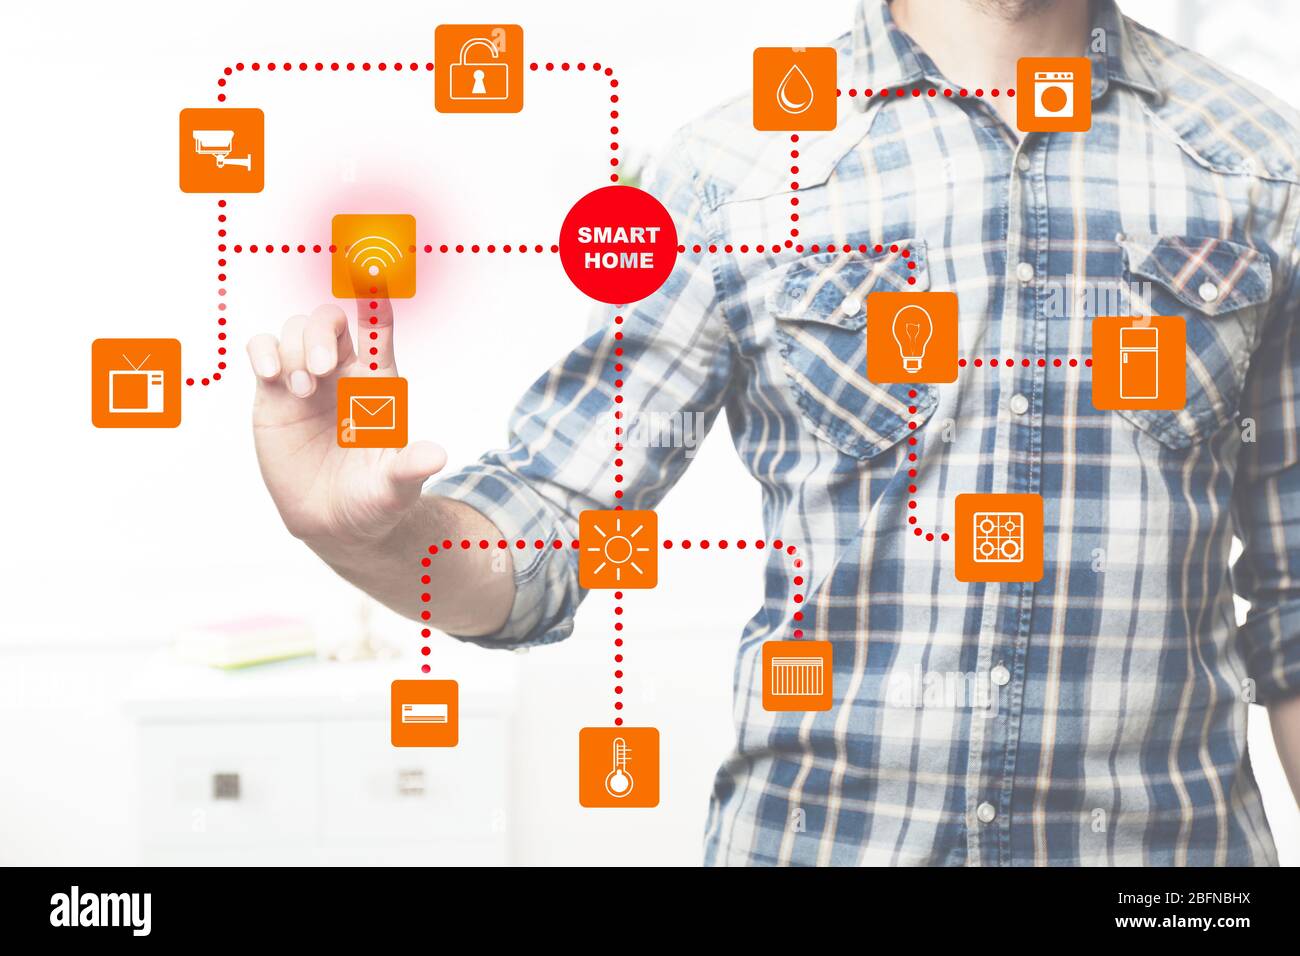 Man using smart home application on virtual screen. Innovation technology concept. Stock Photo